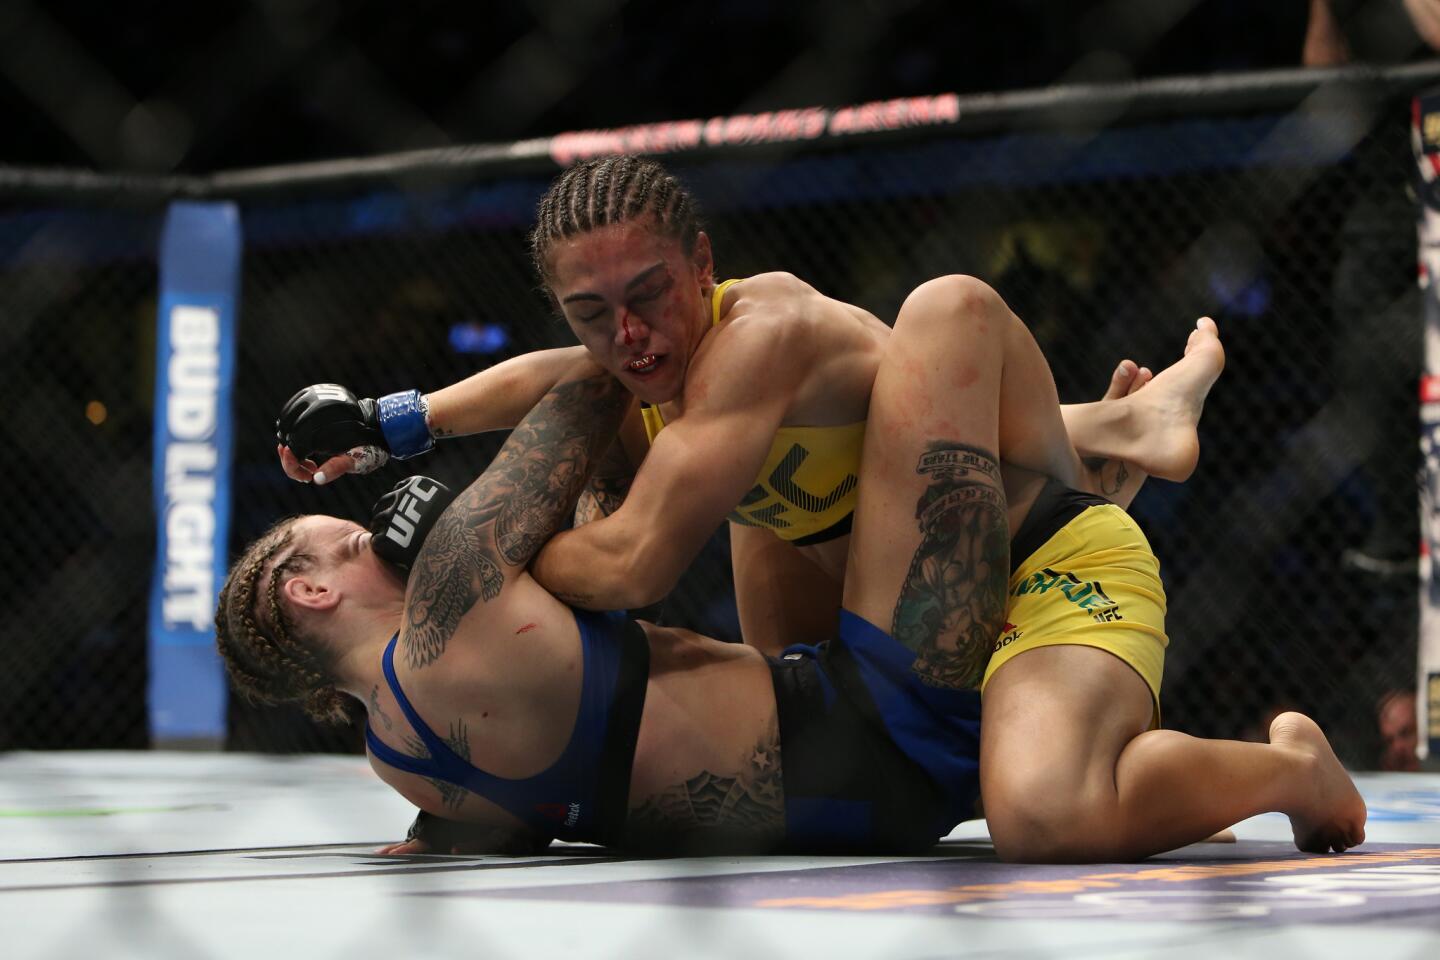 Jessica Andrade, top, defeated Joanne Calderwood by submission Sept. 10 at UFC 203 in Cleveland.